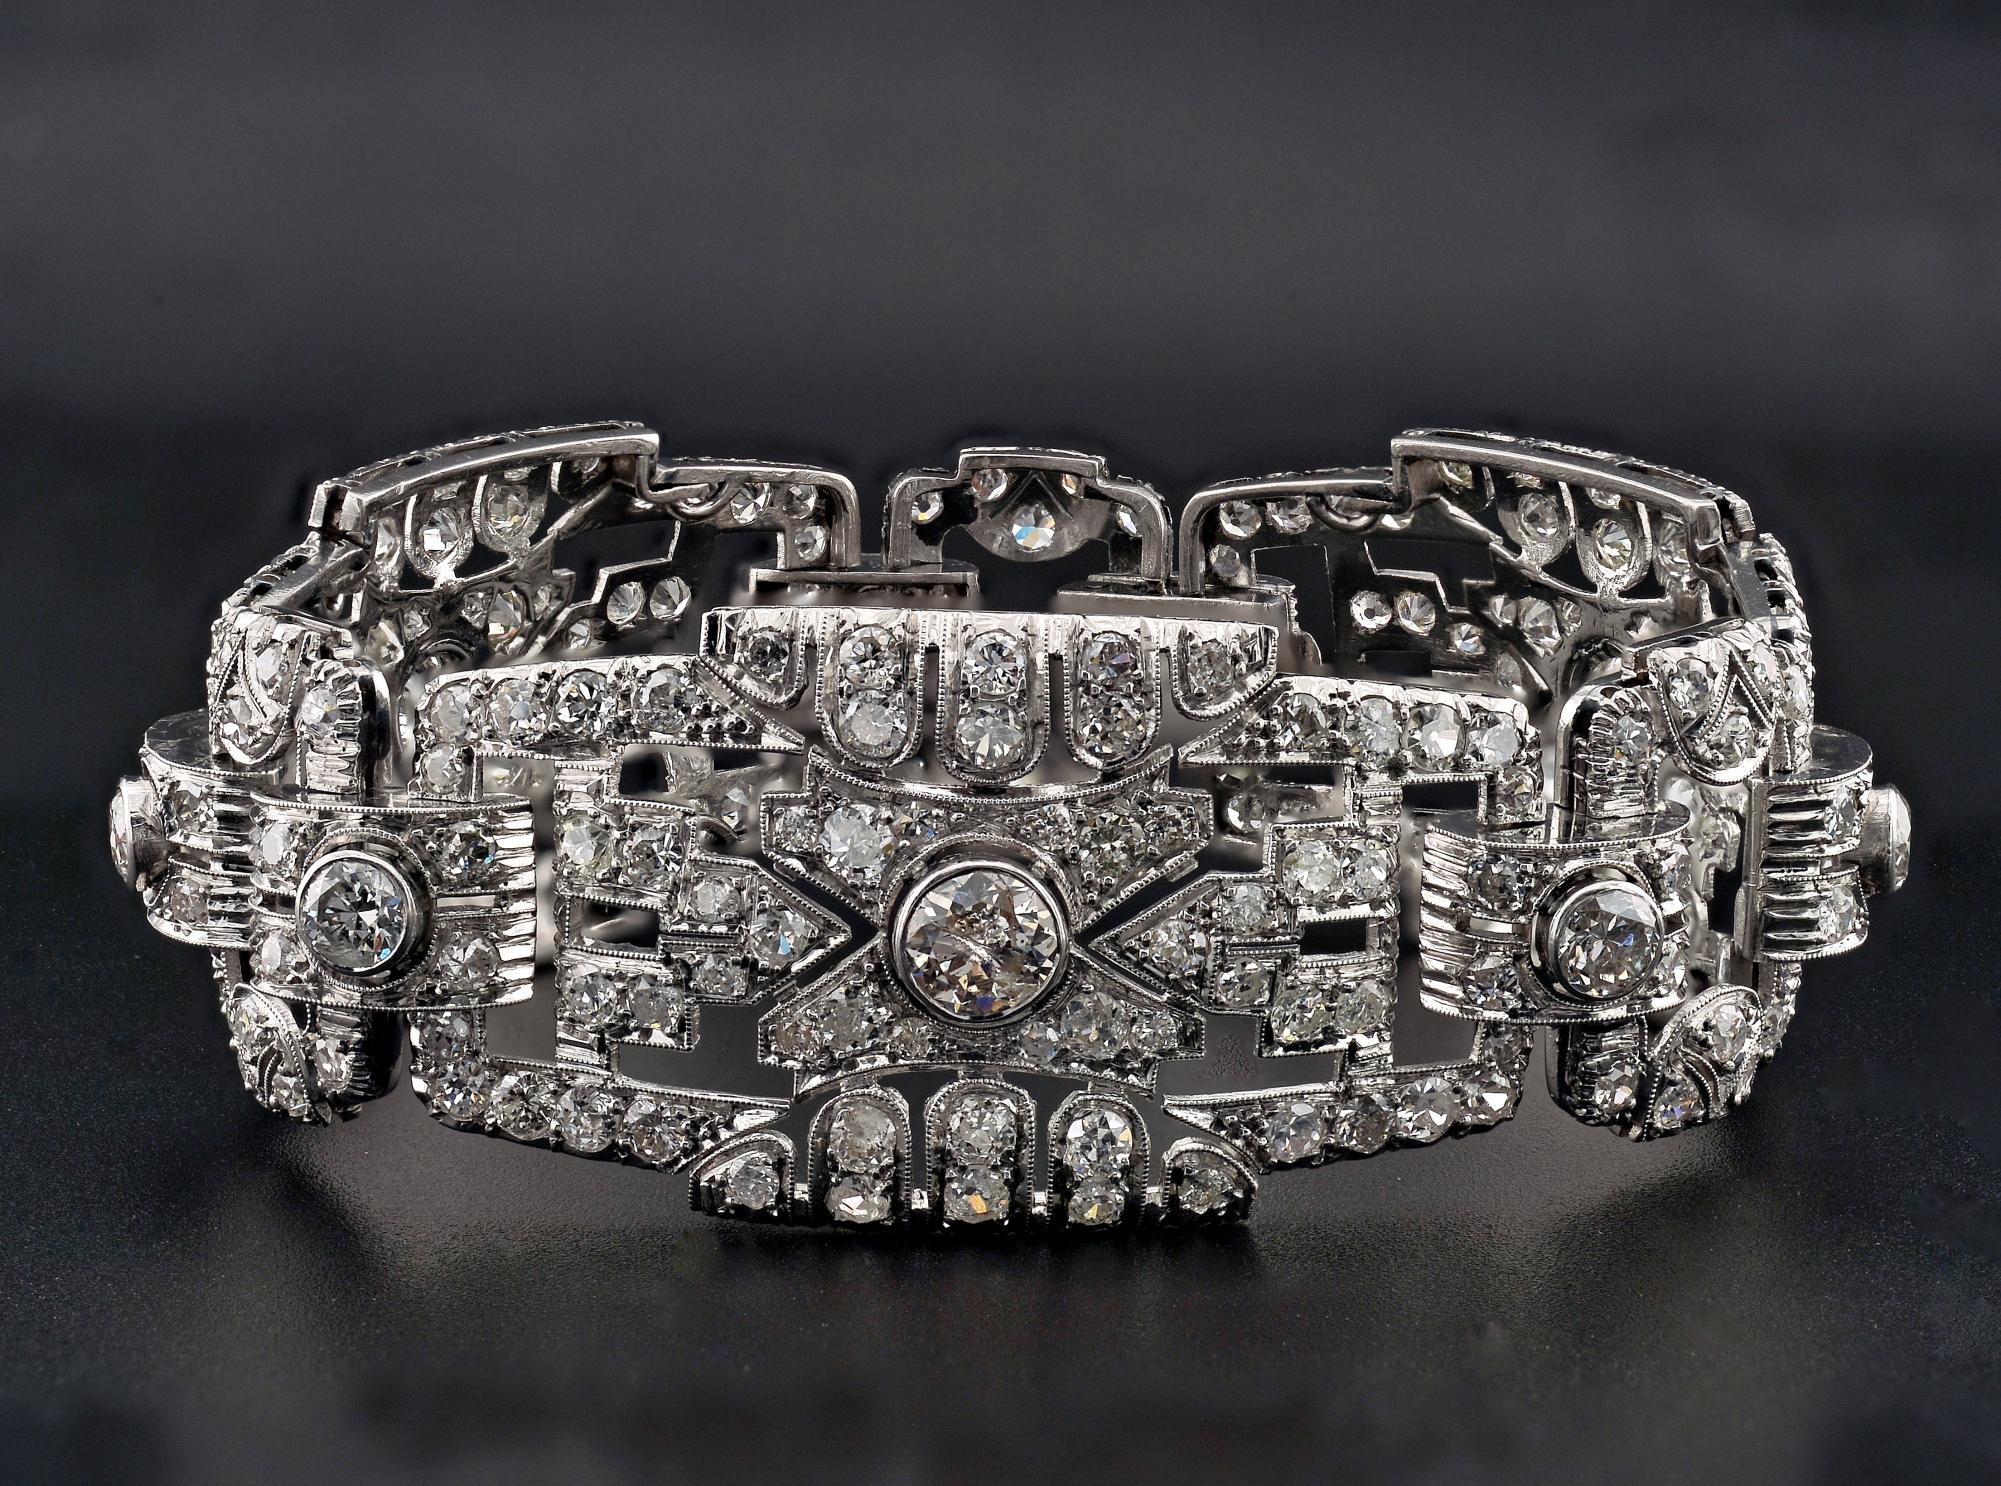 In the History of the 20’s
This striking and impressive Art Deco bracelet steps back to the 20’s
Epitome of eternal elegance, great in design to be a one off piece for ever and ever
Hand fabricated of solid Platinum this Art Deco dazzler is composed